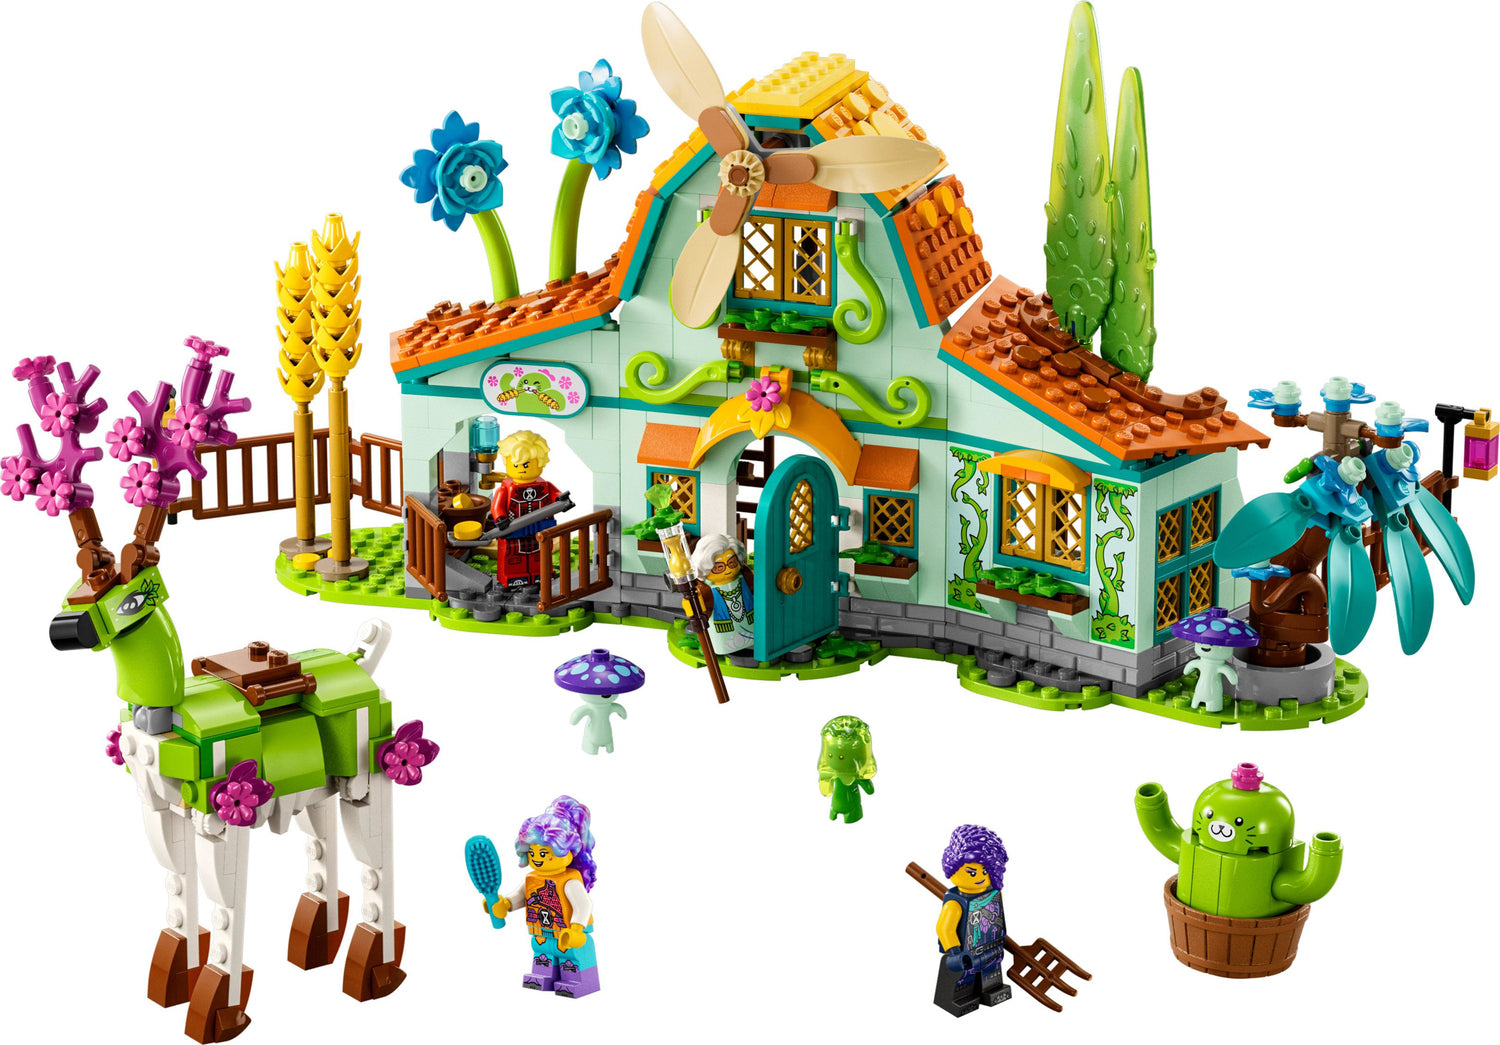 LEGO® DREAMZzz™ Stable of Dream Creatures Set